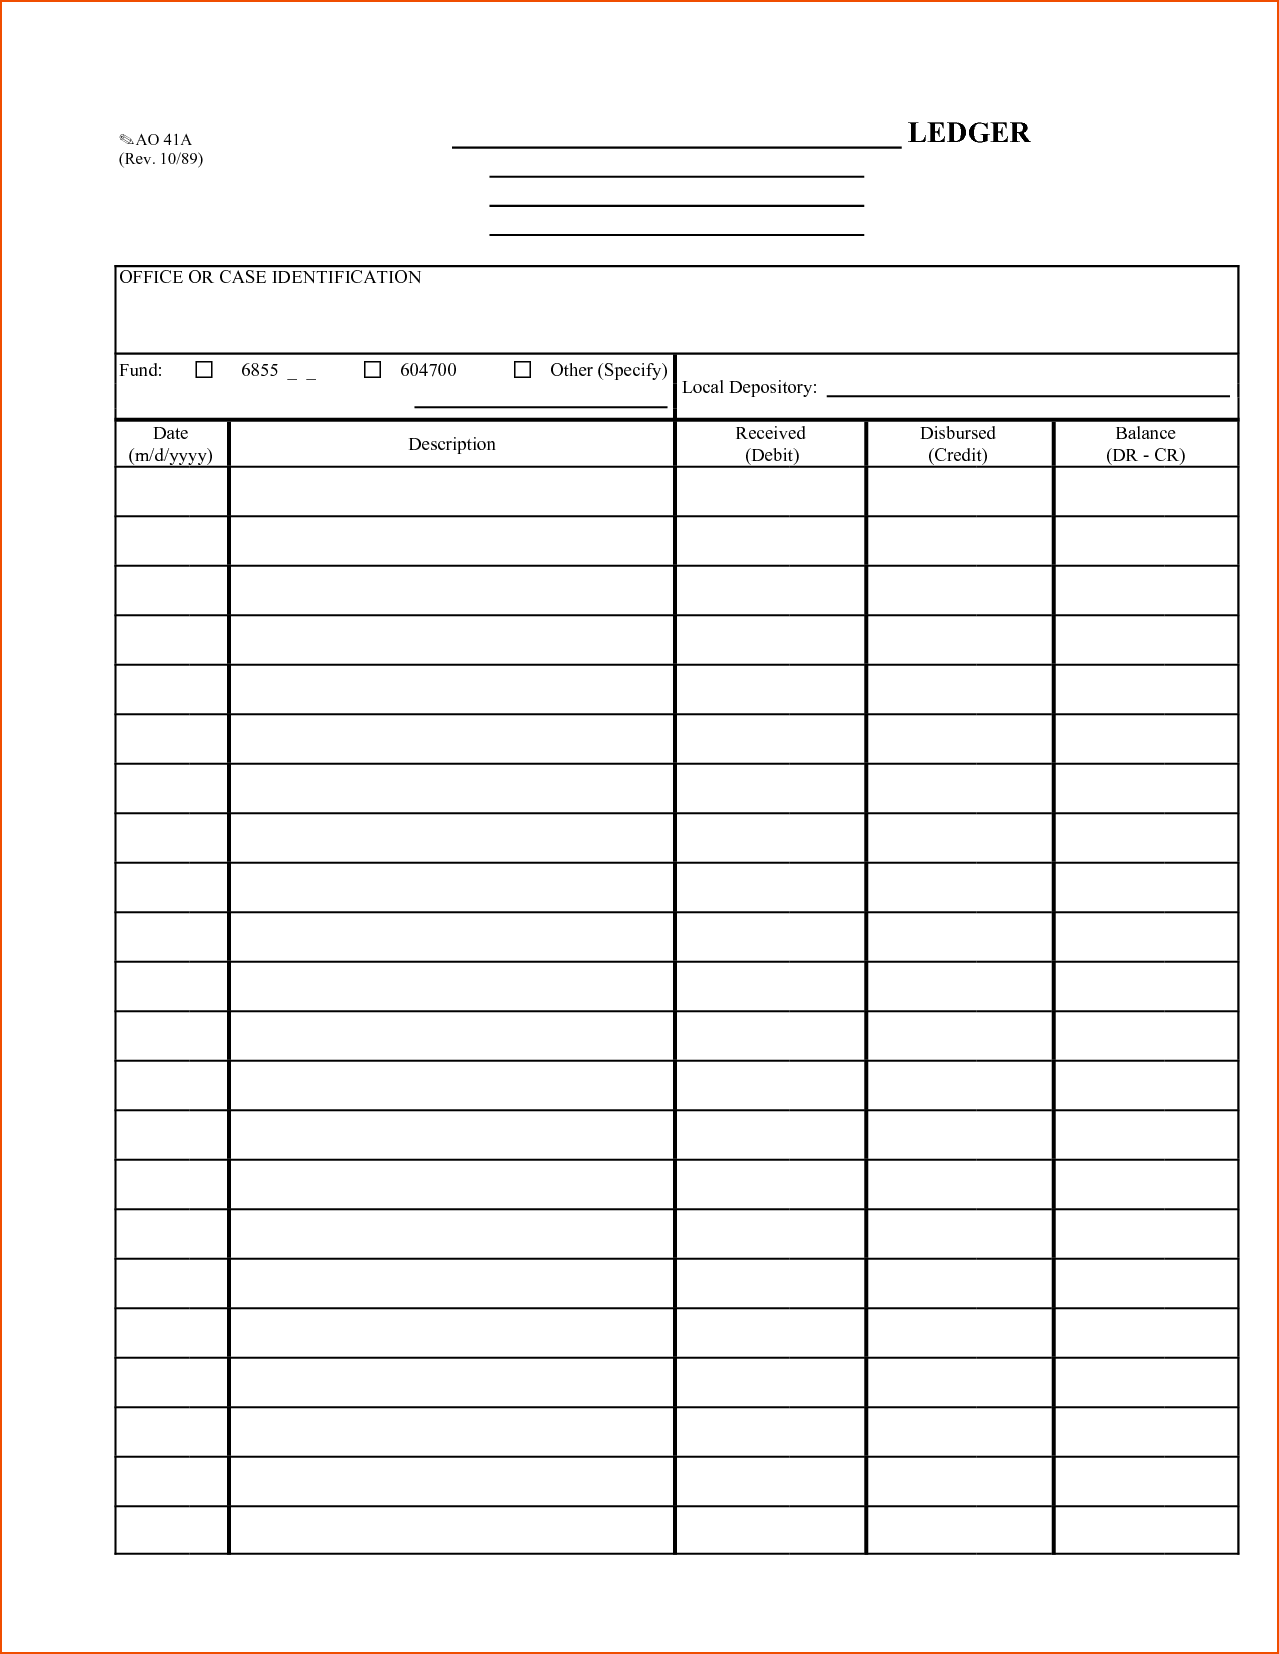 Free Printable Daily Expense Ledger and February Finance Goals 